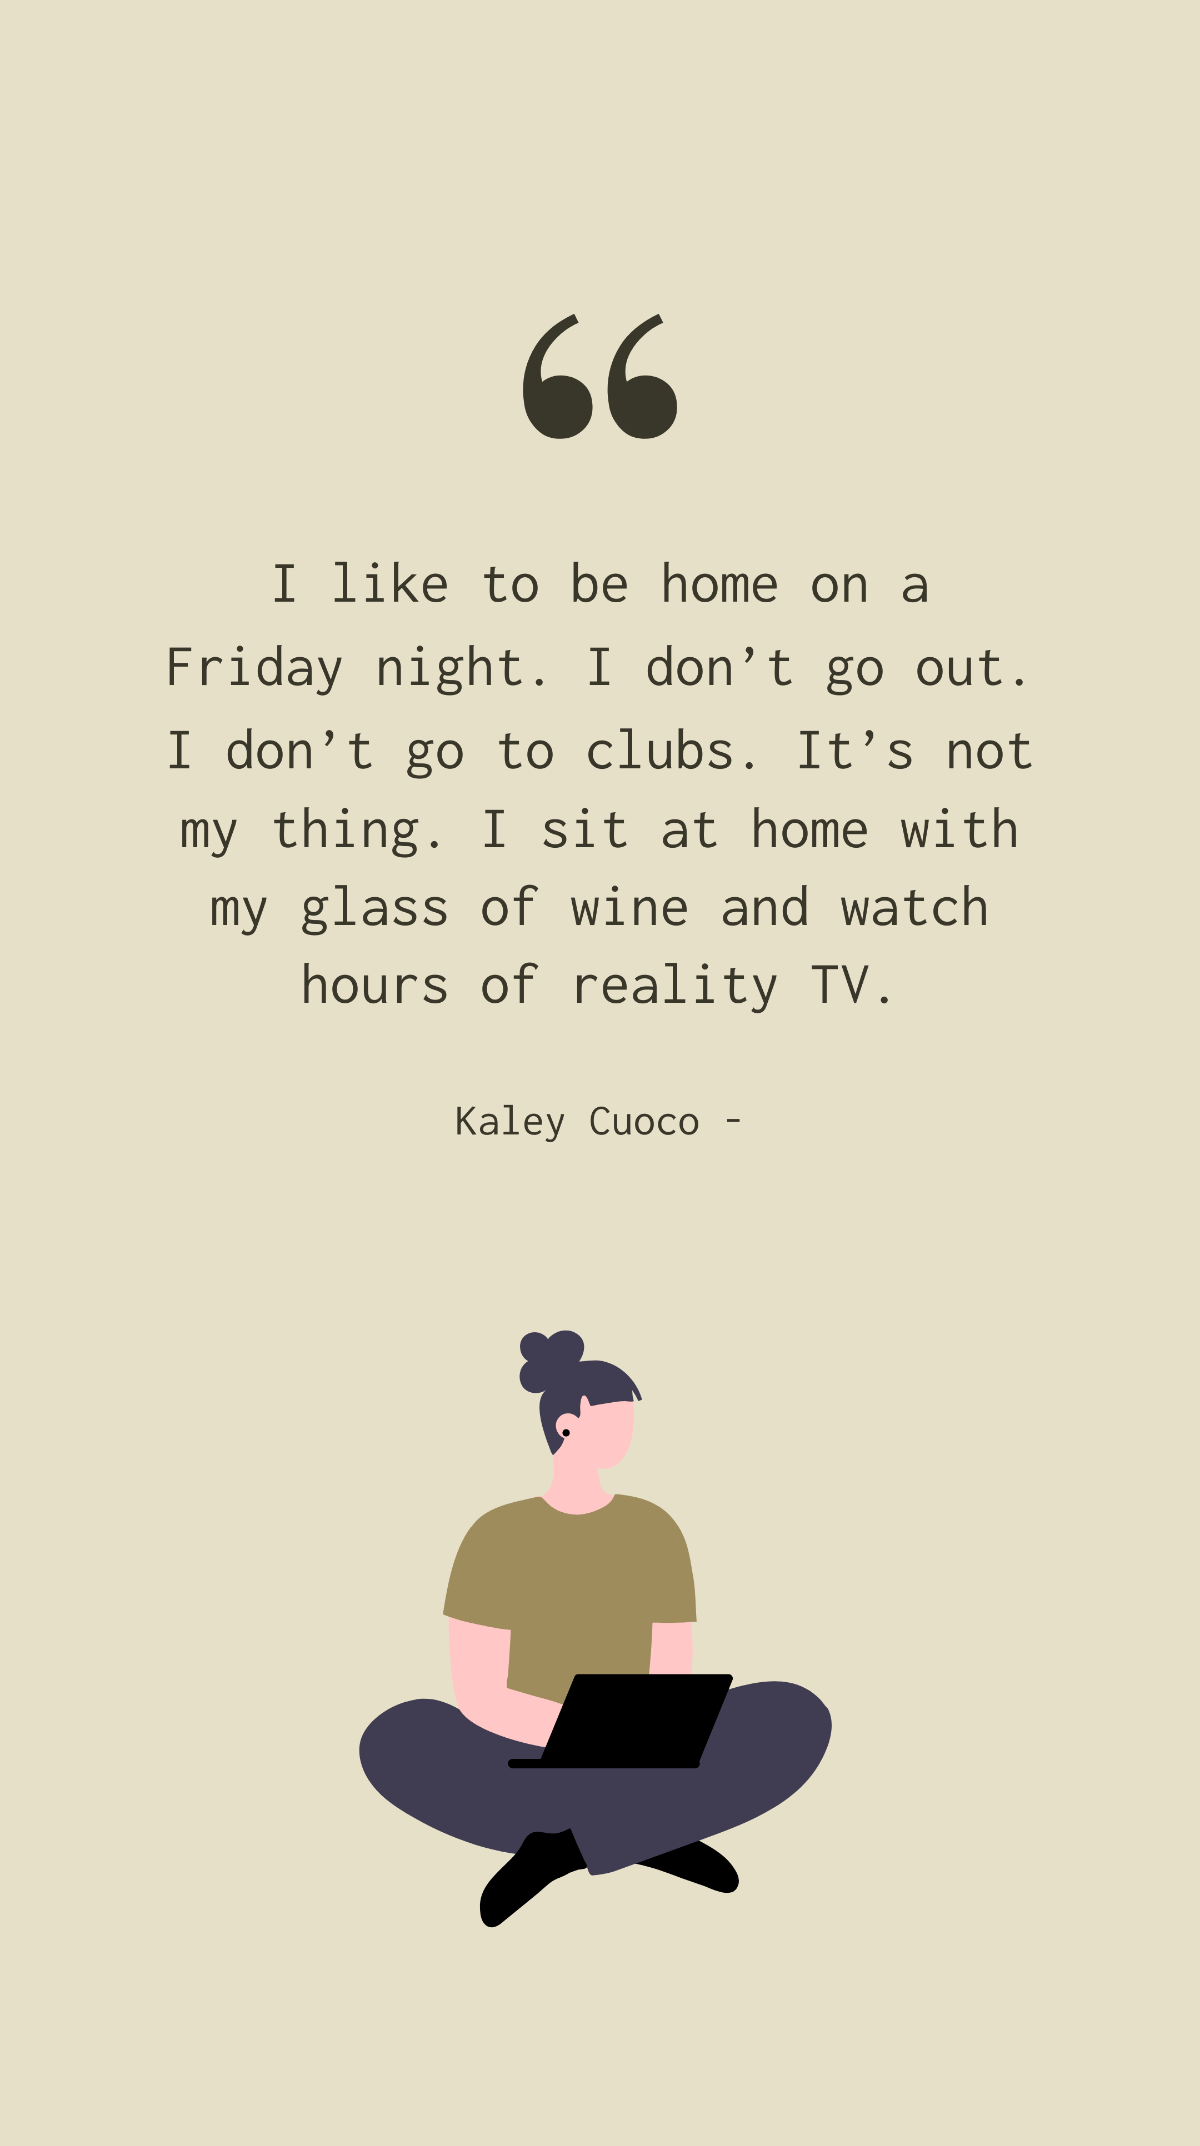 Kaley Cuoco - I like to be home on a Friday night. I don’t go out. I don’t go to clubs. It’s not my thing. I sit at home with my glass of wine and watch hours of reality TV. Template